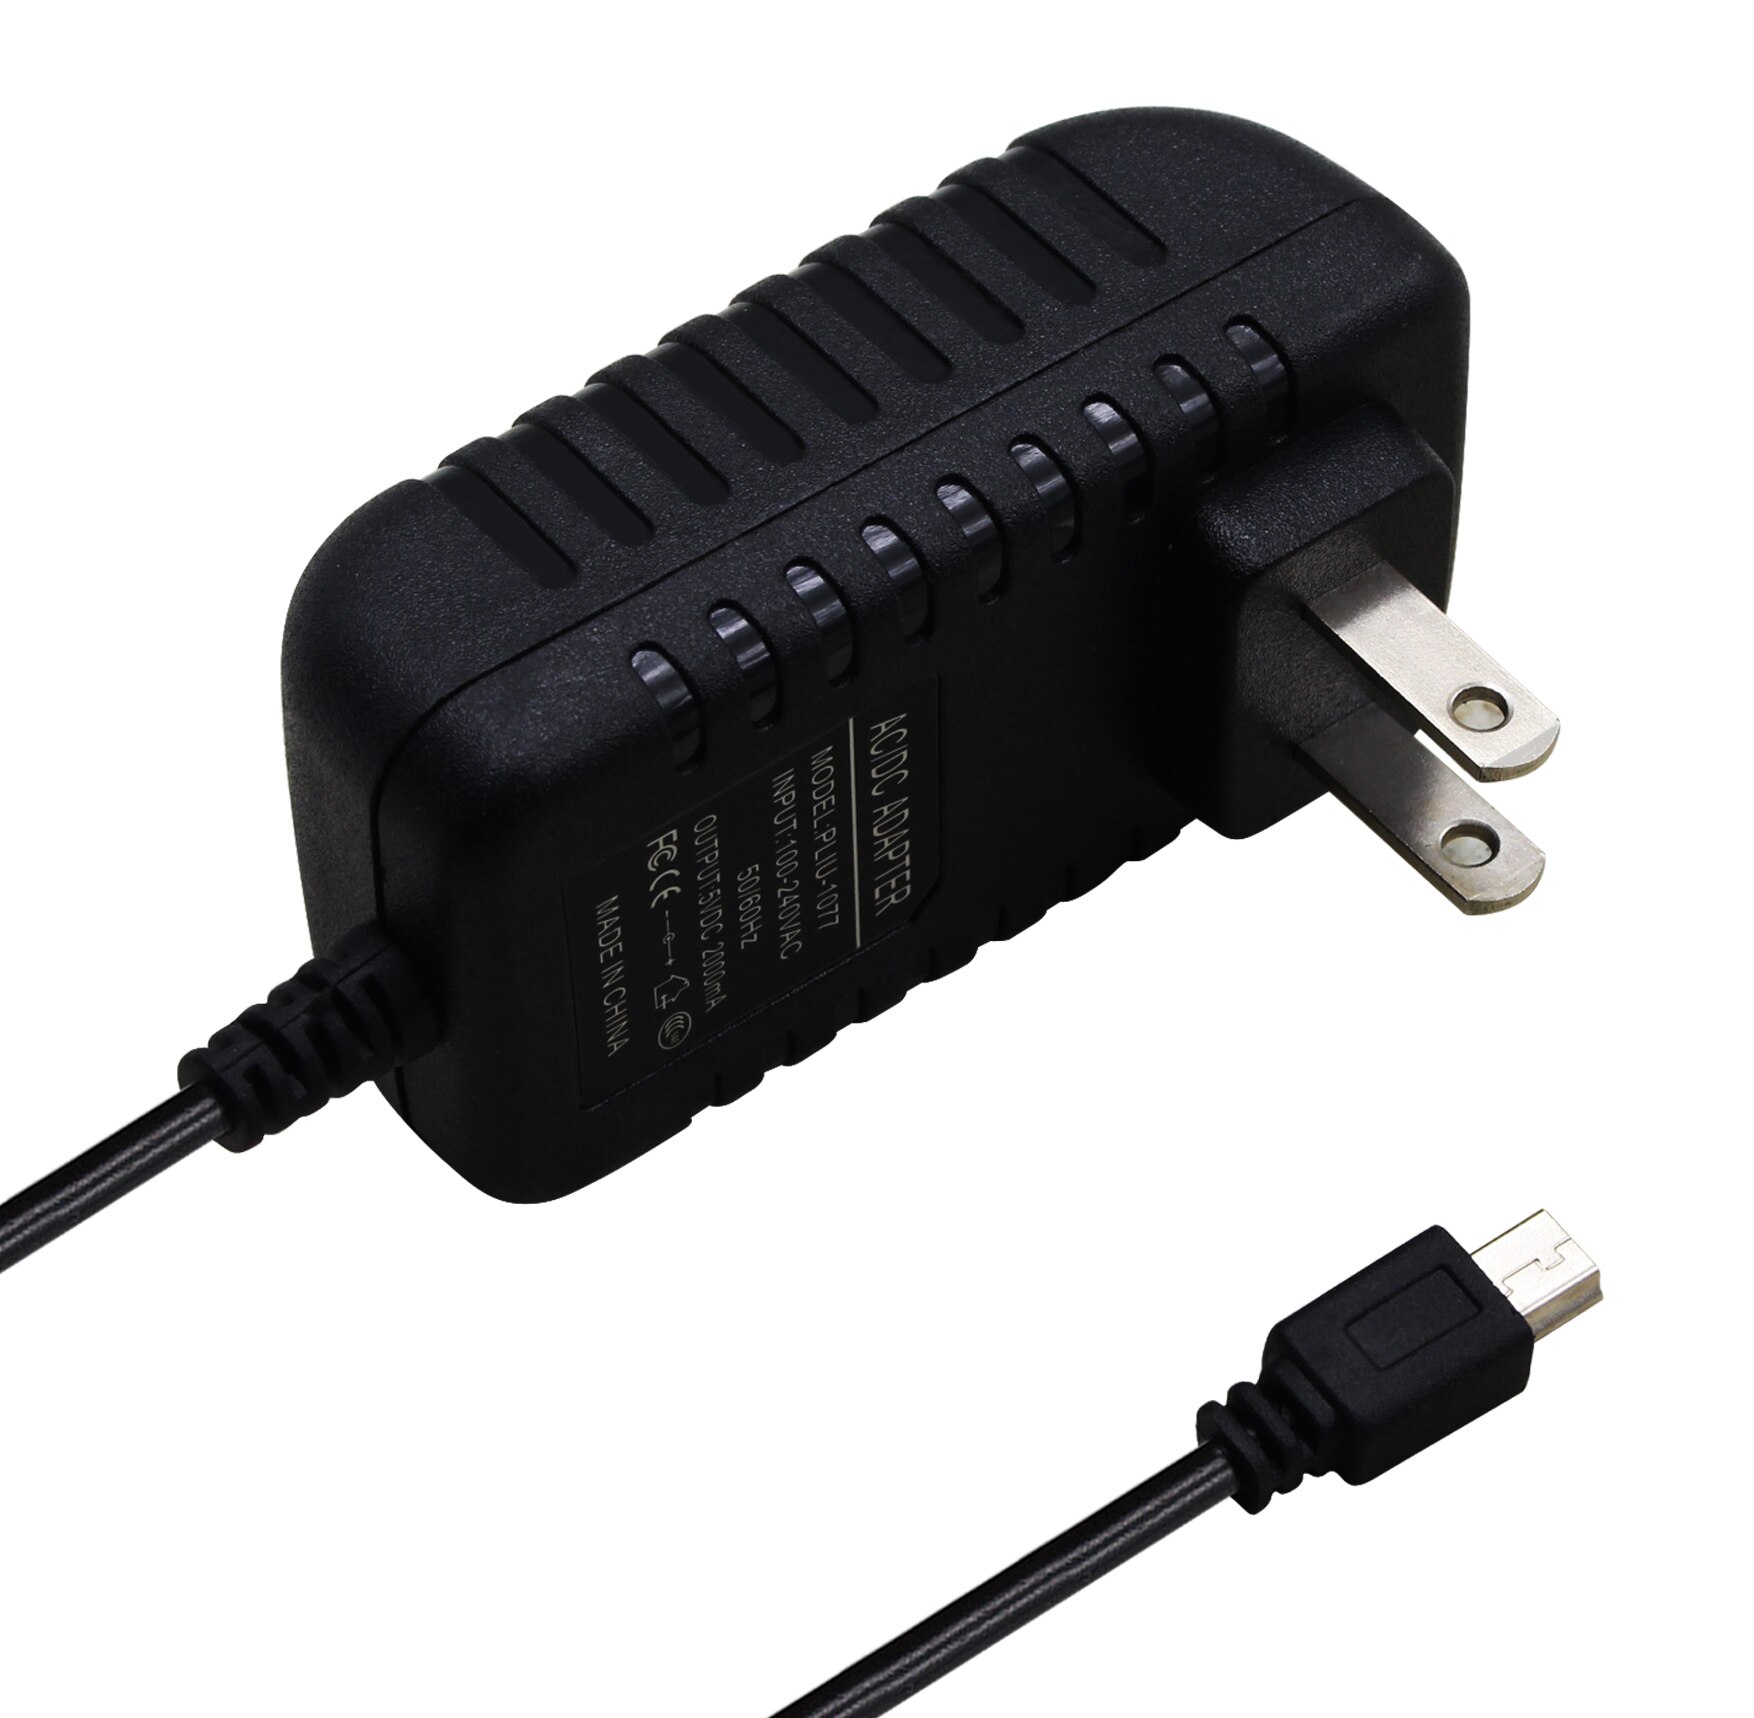 Ac/Dc Power Adapter Wall Charger Voor Leapfrog Leappad 3 Model #31500 Kids